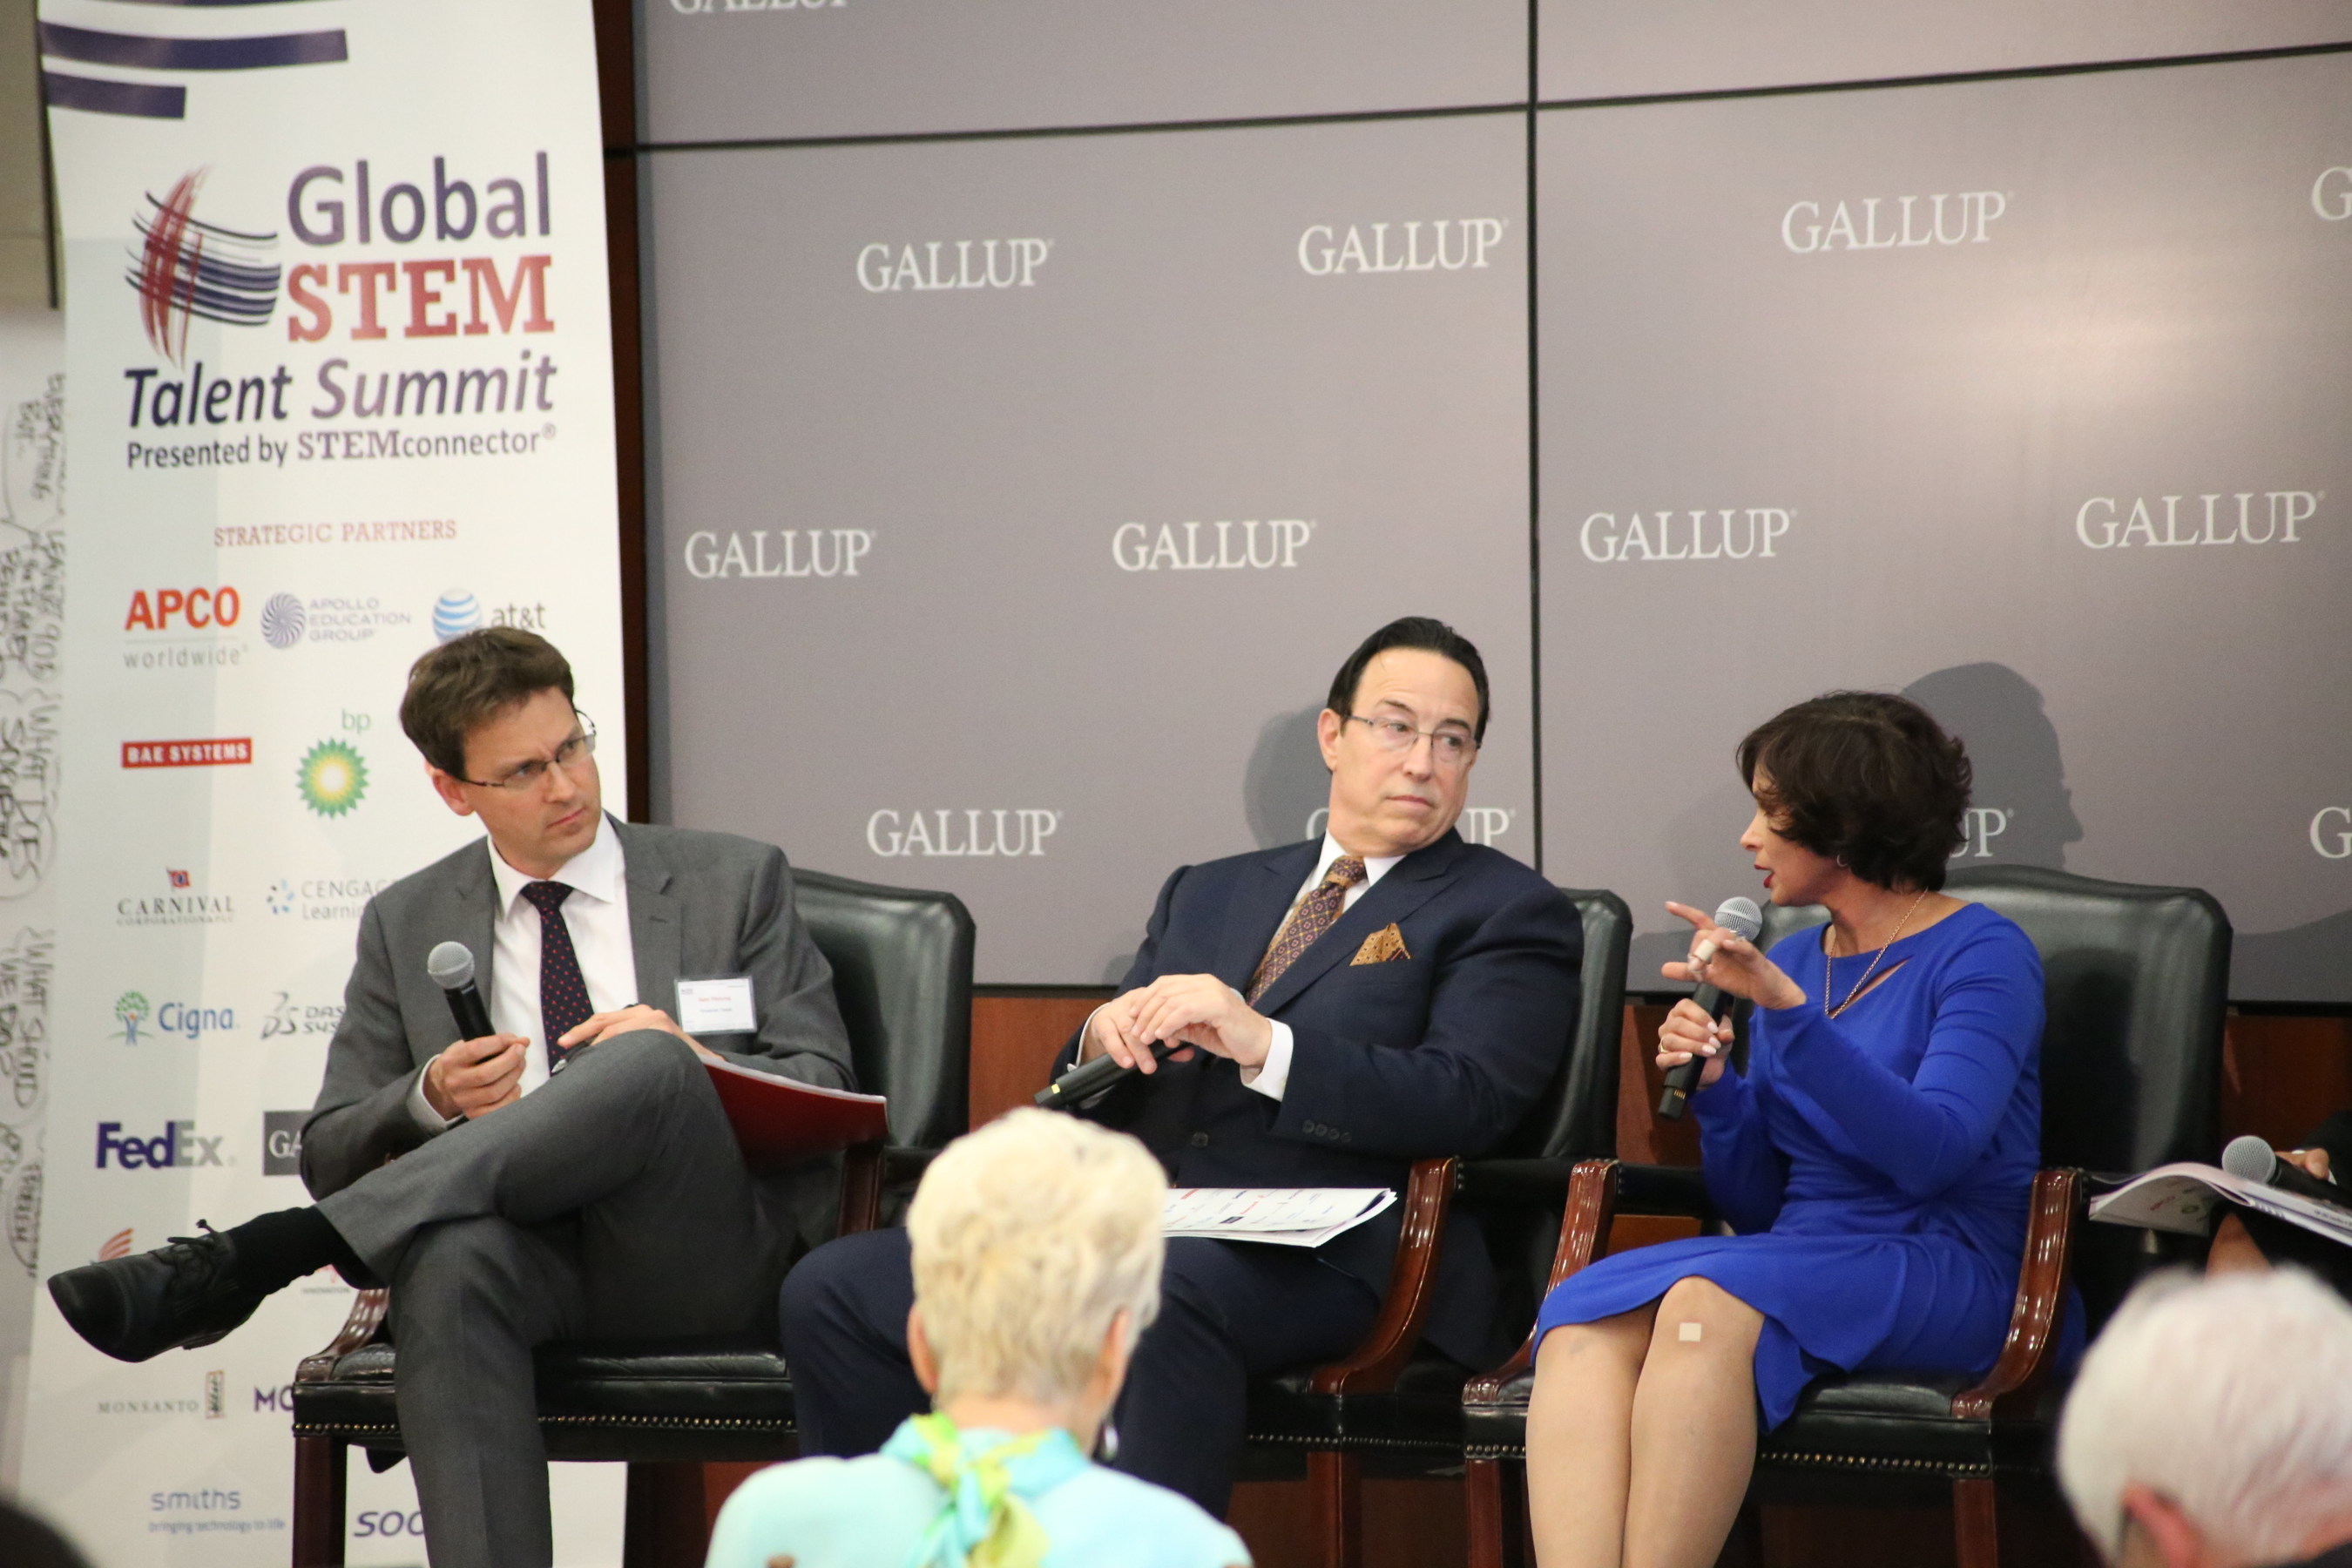 Financial Times Economics Editor, Sam Fleming (l) discusses challenges to developing skilled talent with CEO of Healthcare, Michael Norris, Sodexo North America (c) and Seema Kumar, vice president of innovation, Johnson & Johnson (r) at the 2016 Global STEM Talent Summit in Washington D.C. April 28, 2016.